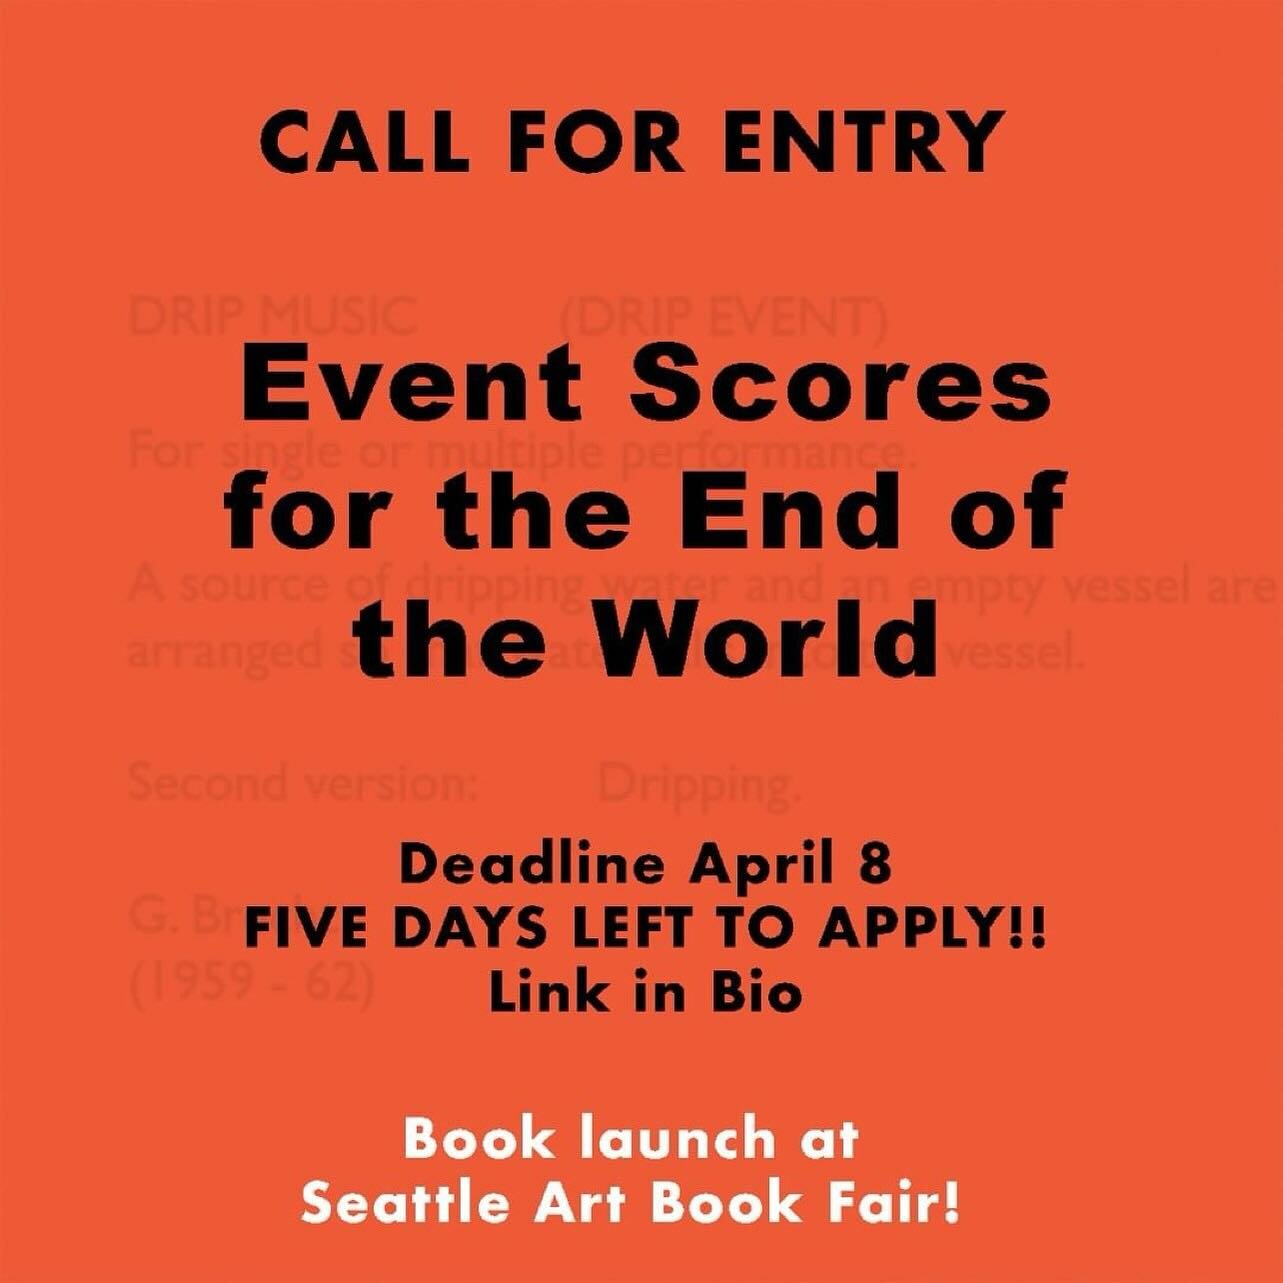 Repost from @adelaide_blair OKAY Y&rsquo;ALL, only 5 days left to apply! If you want to learn more about event scores, there are links to examples on the application form.

WRITERS and ARTISTS! My new project (The PNW Conceptual Art Center - a concep